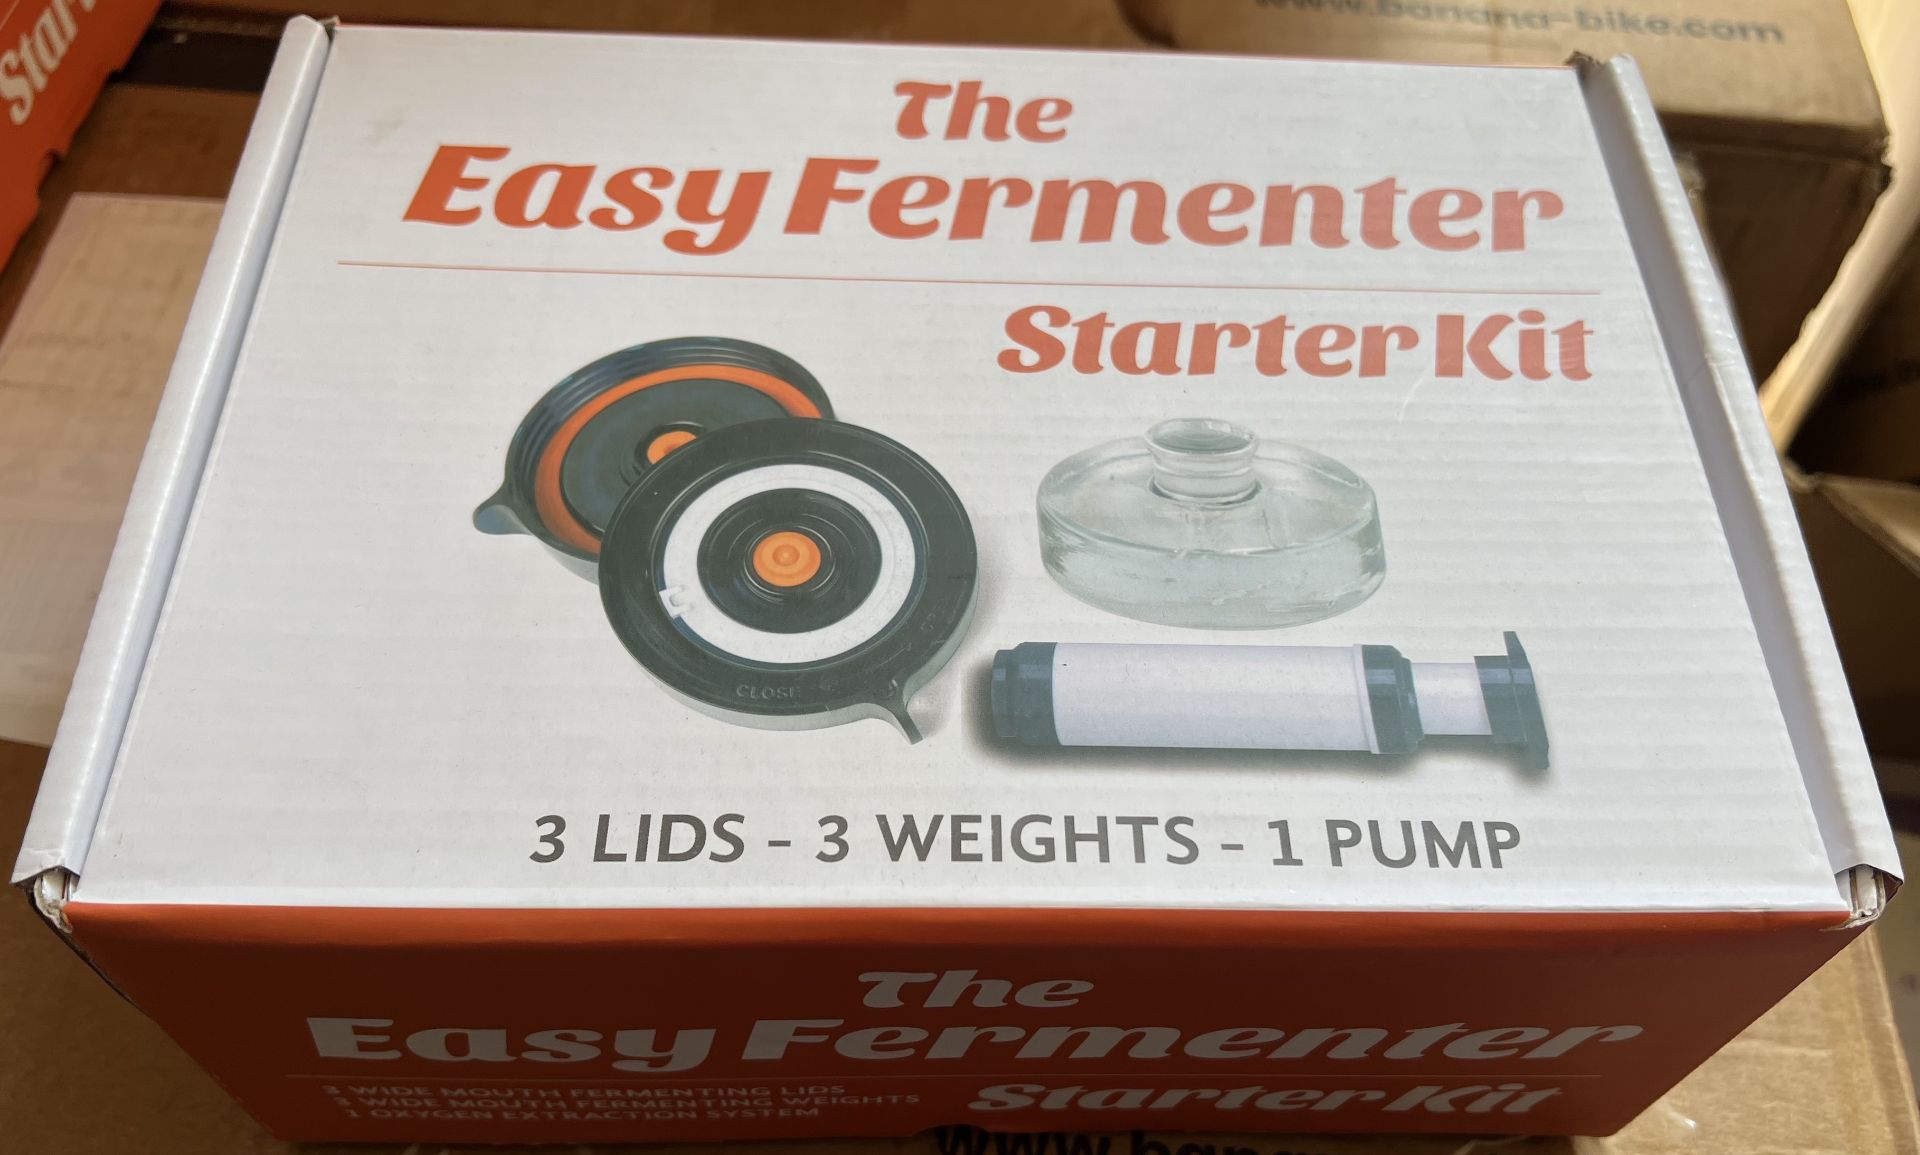 10 x Nourished Essentials Easy Fermenter Wide Mouth Fermentation Kit (3 Lids + 3 Weights + Pump) The - Image 3 of 5